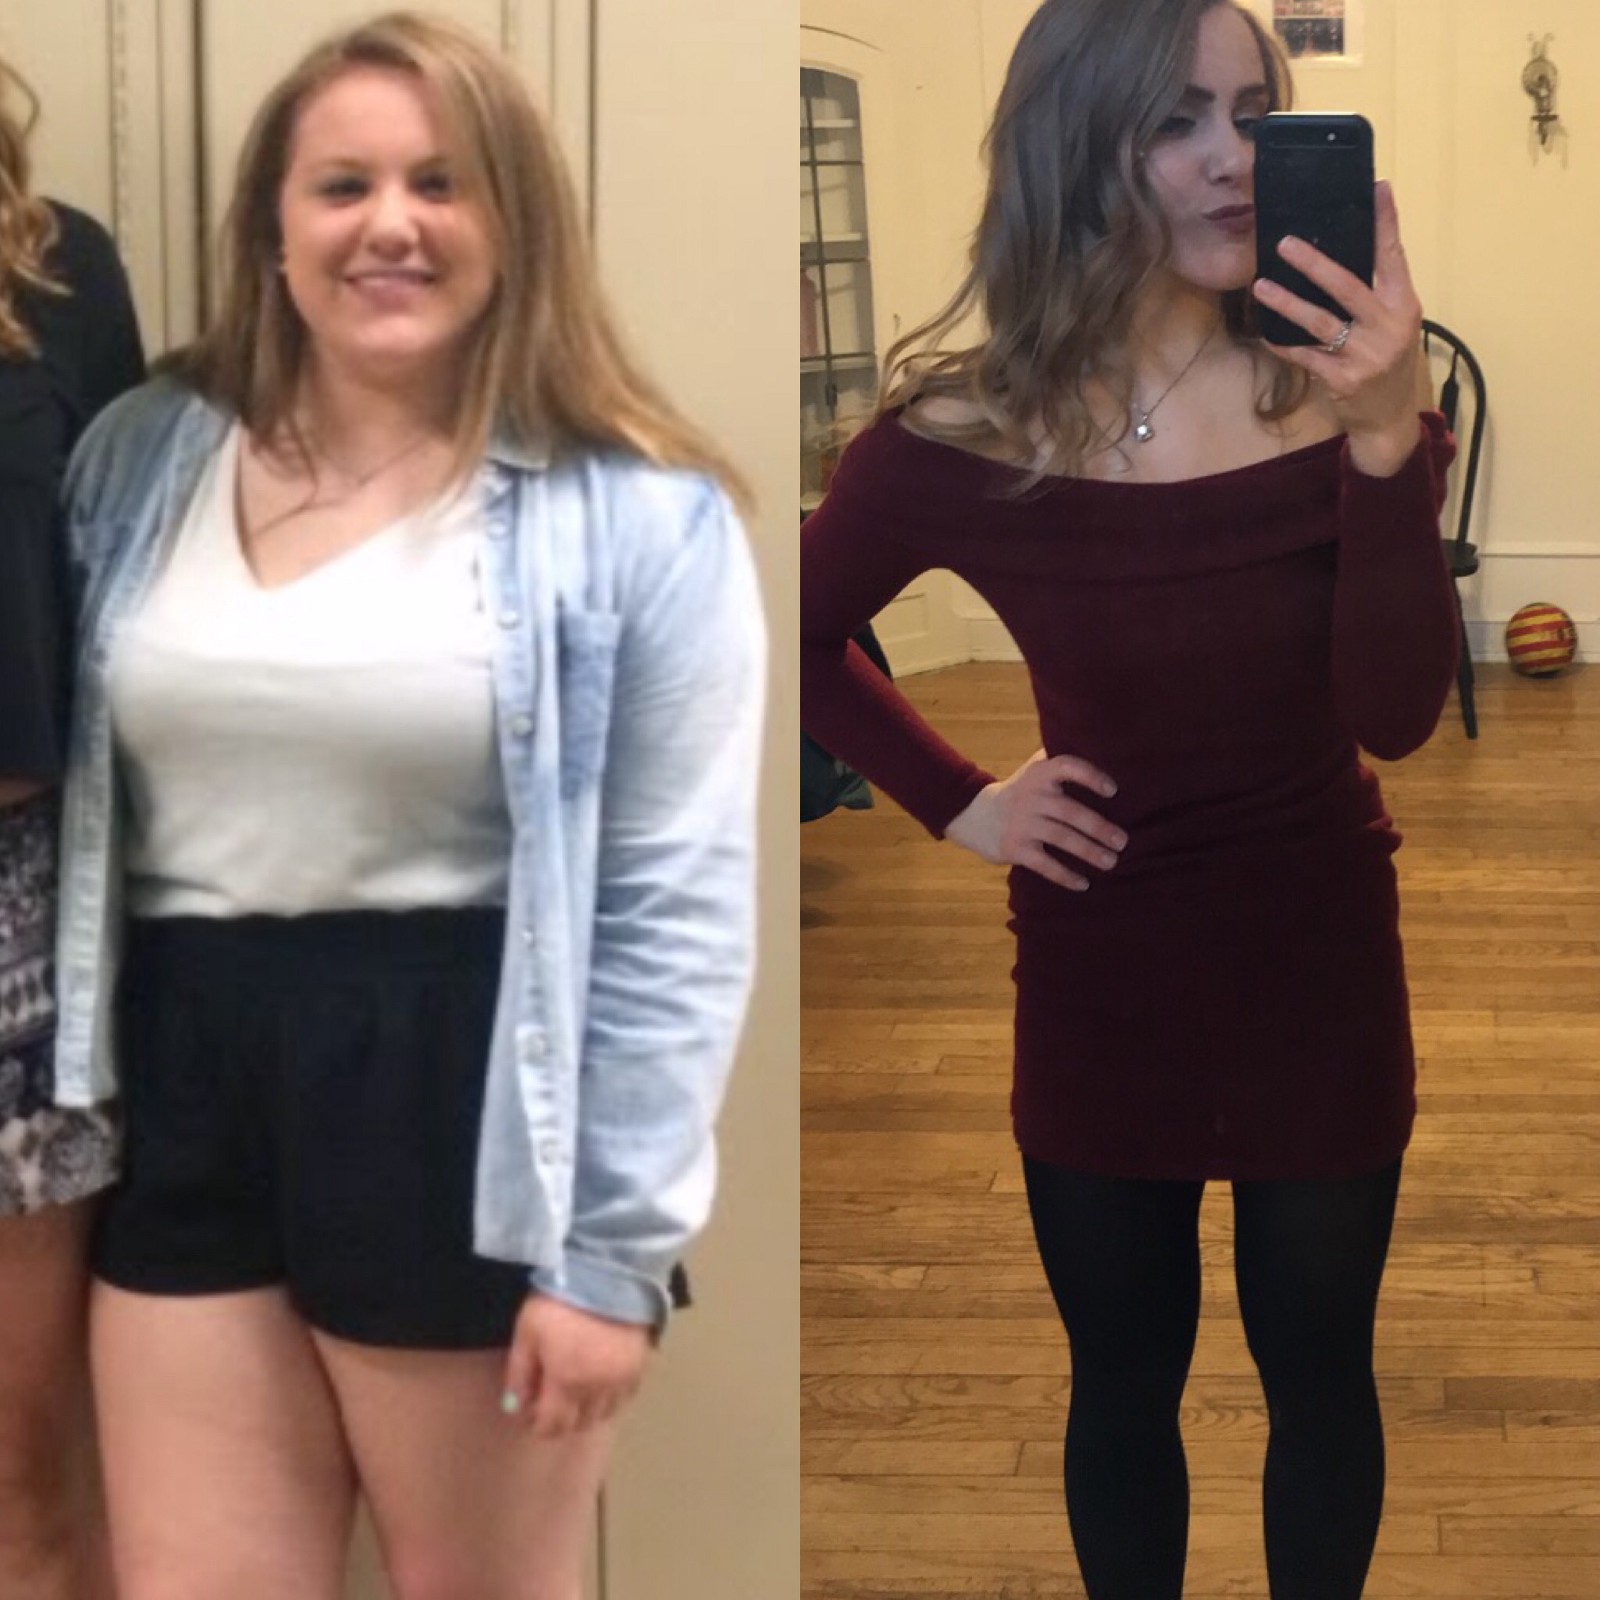 Two pictures (before and after), on the first a girl with some overweight, on the second a happy and self-confident girl without any overweight